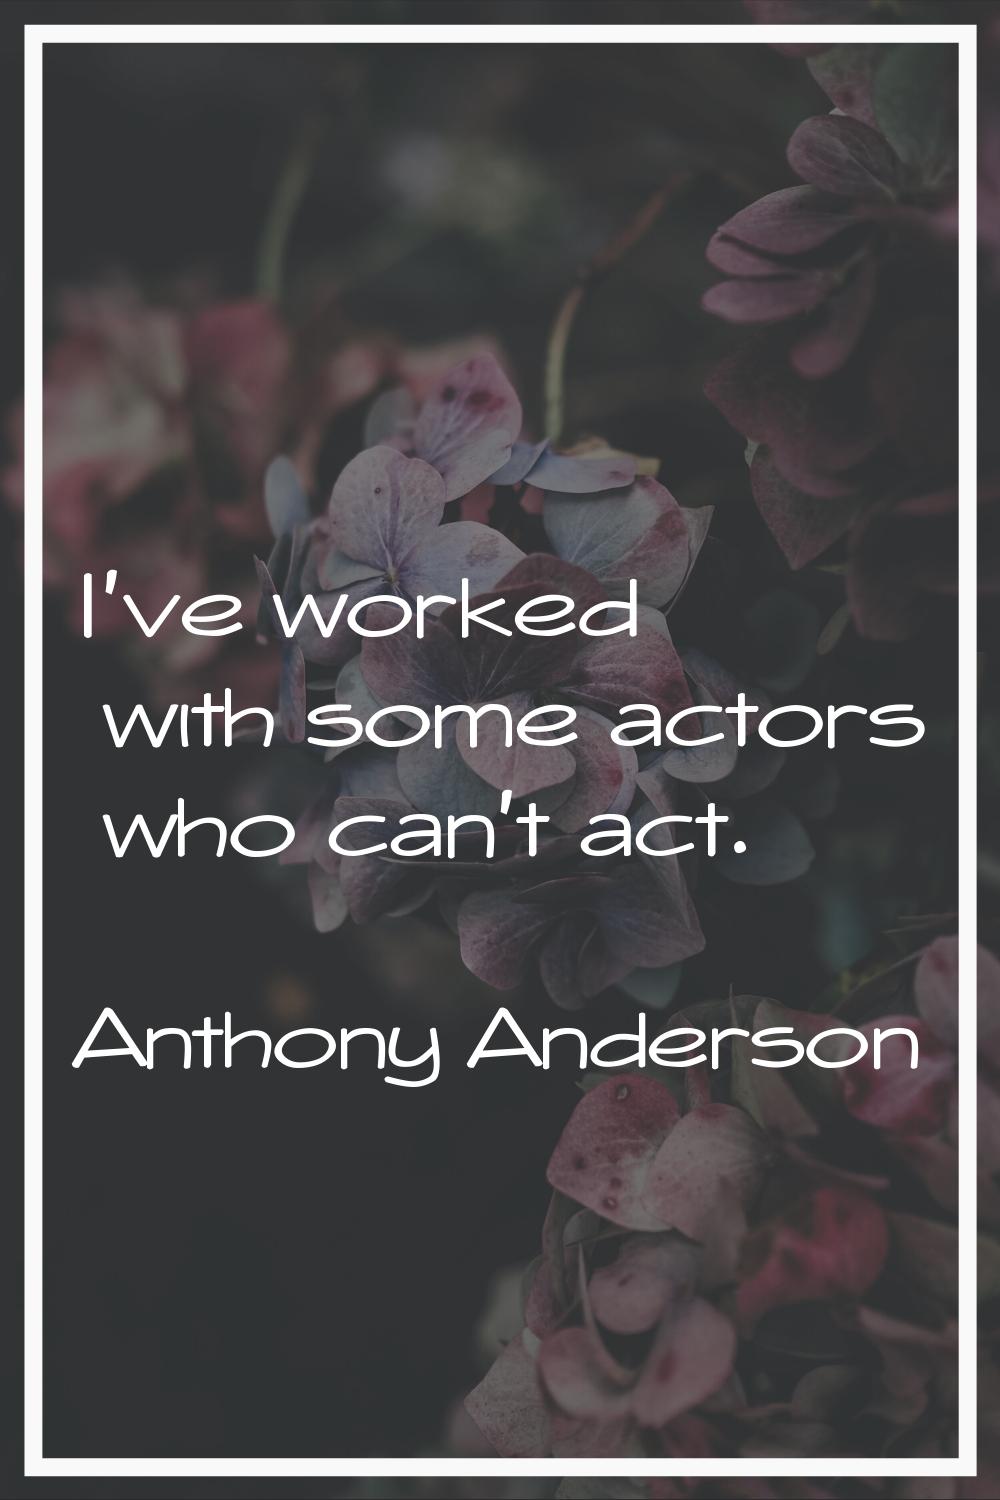 I've worked with some actors who can't act.